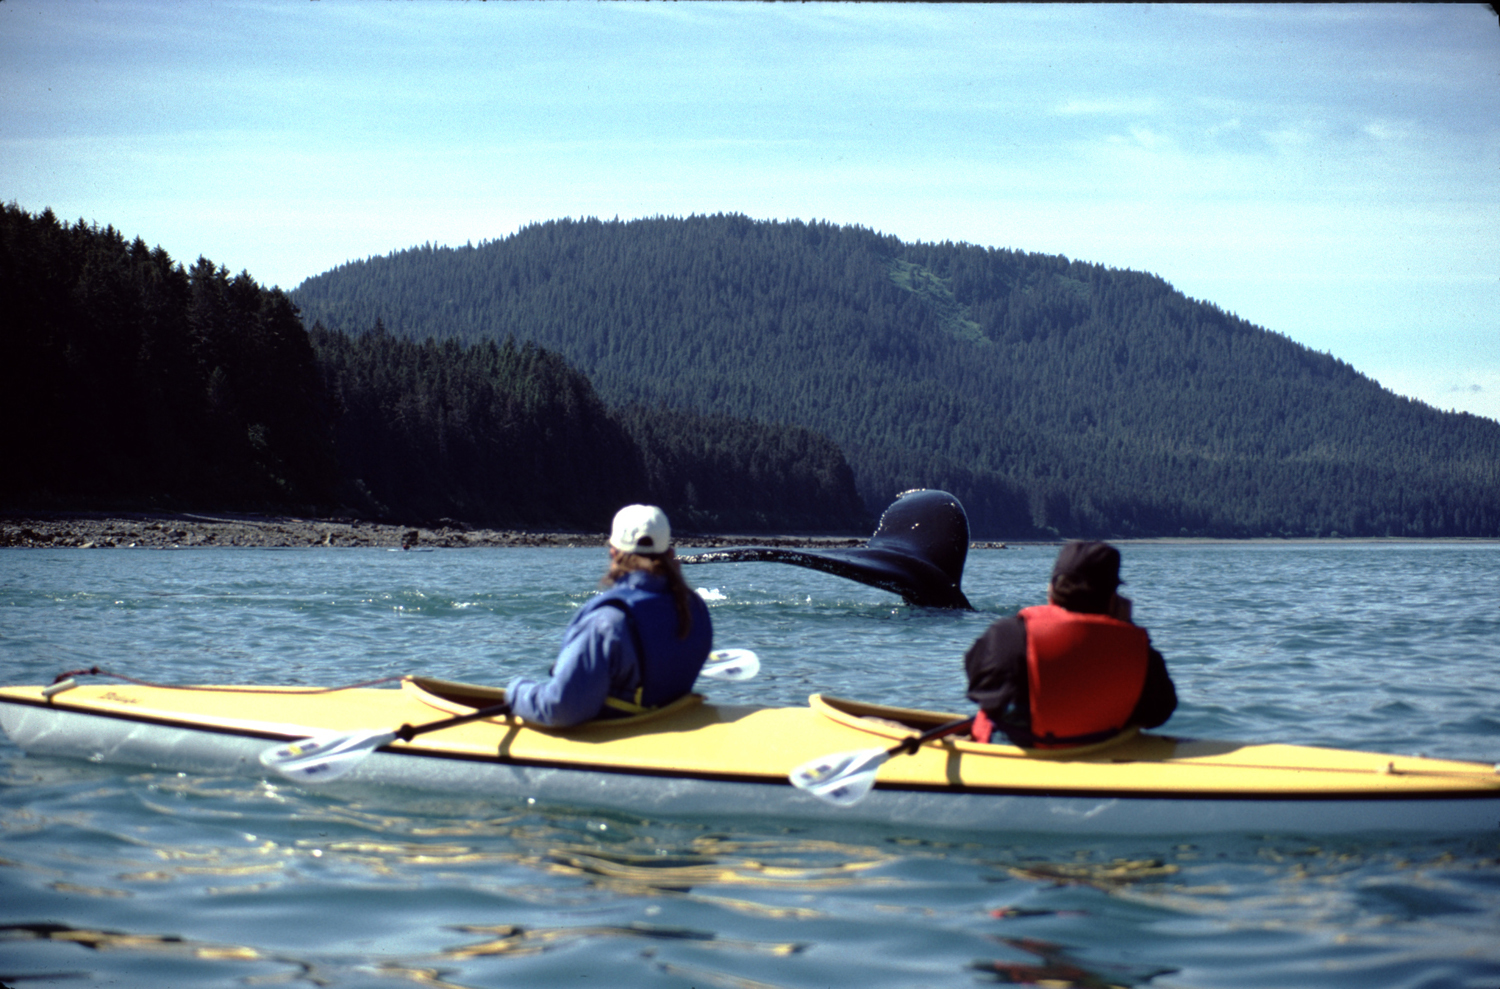 humpback whale tail between kayakers